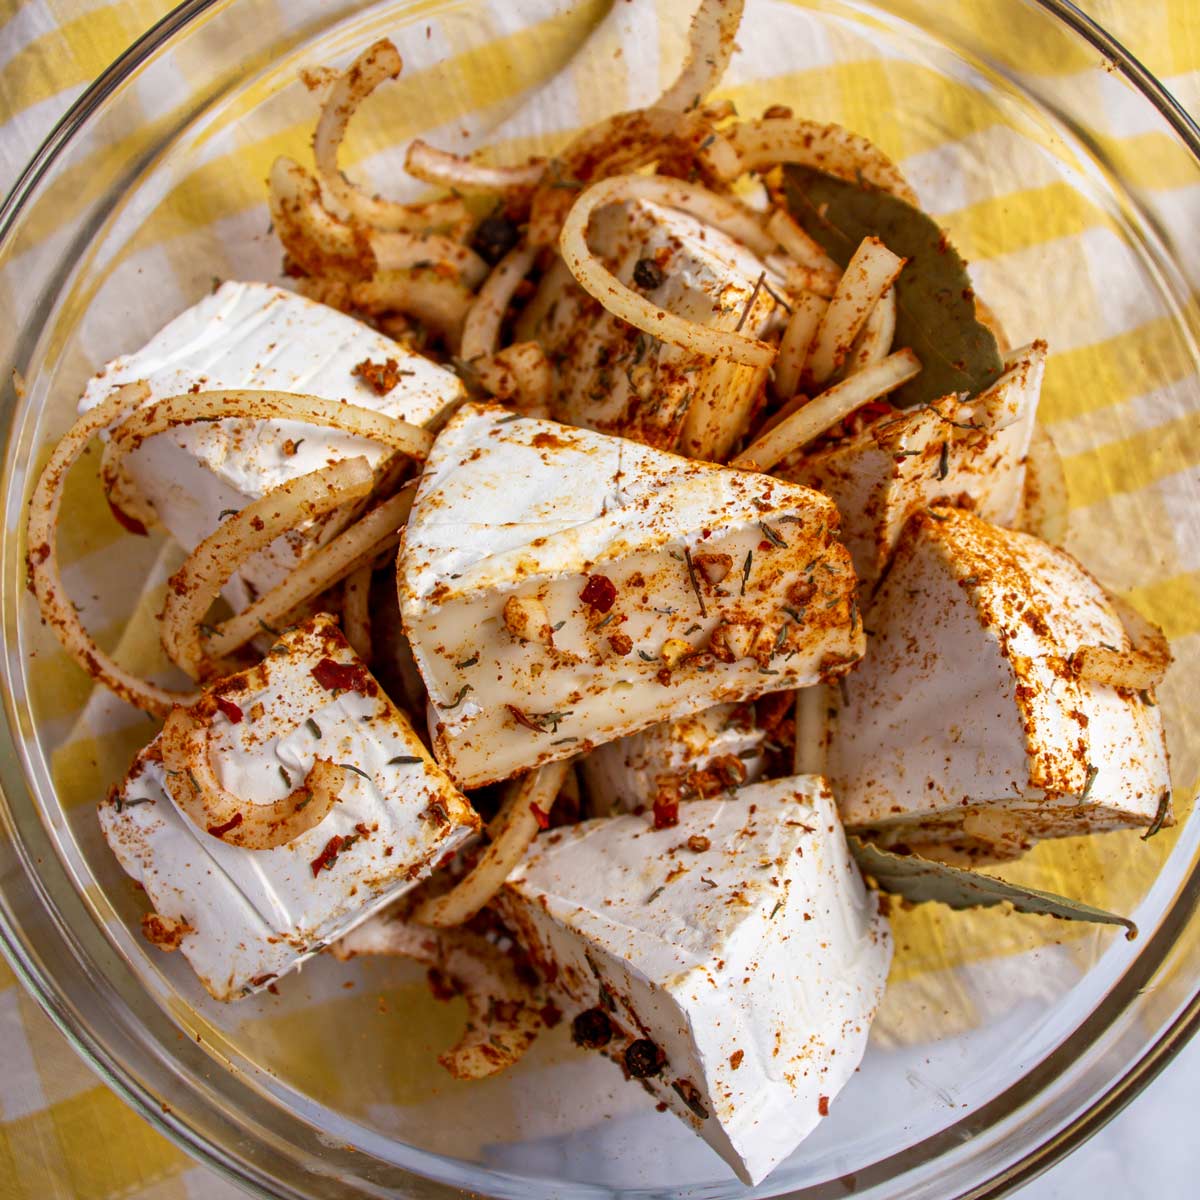 Wedges of brie cheese tossed with spices and sliced onions in a glass bowl.